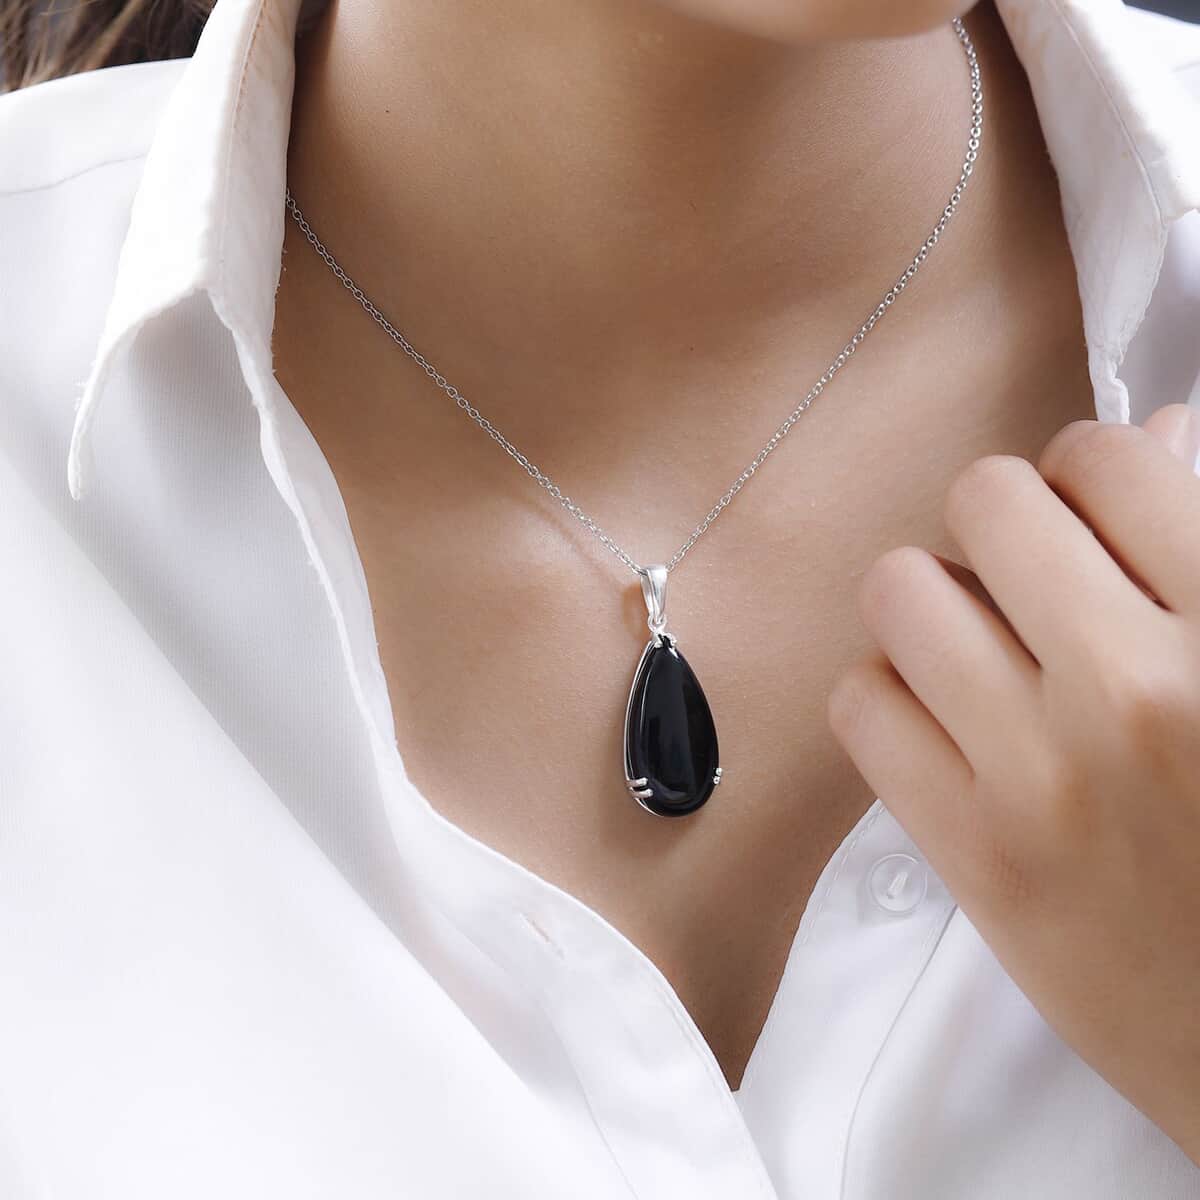 Black Onyx Pendant Necklace 20 Inches in Sterling Silver, Black Teardrop Pendant Necklaces for Women, Silver Boho Pendant - December Birthstone Necklace with Stainless Steel Chain 20 Inches 20.00 ctw image number 2